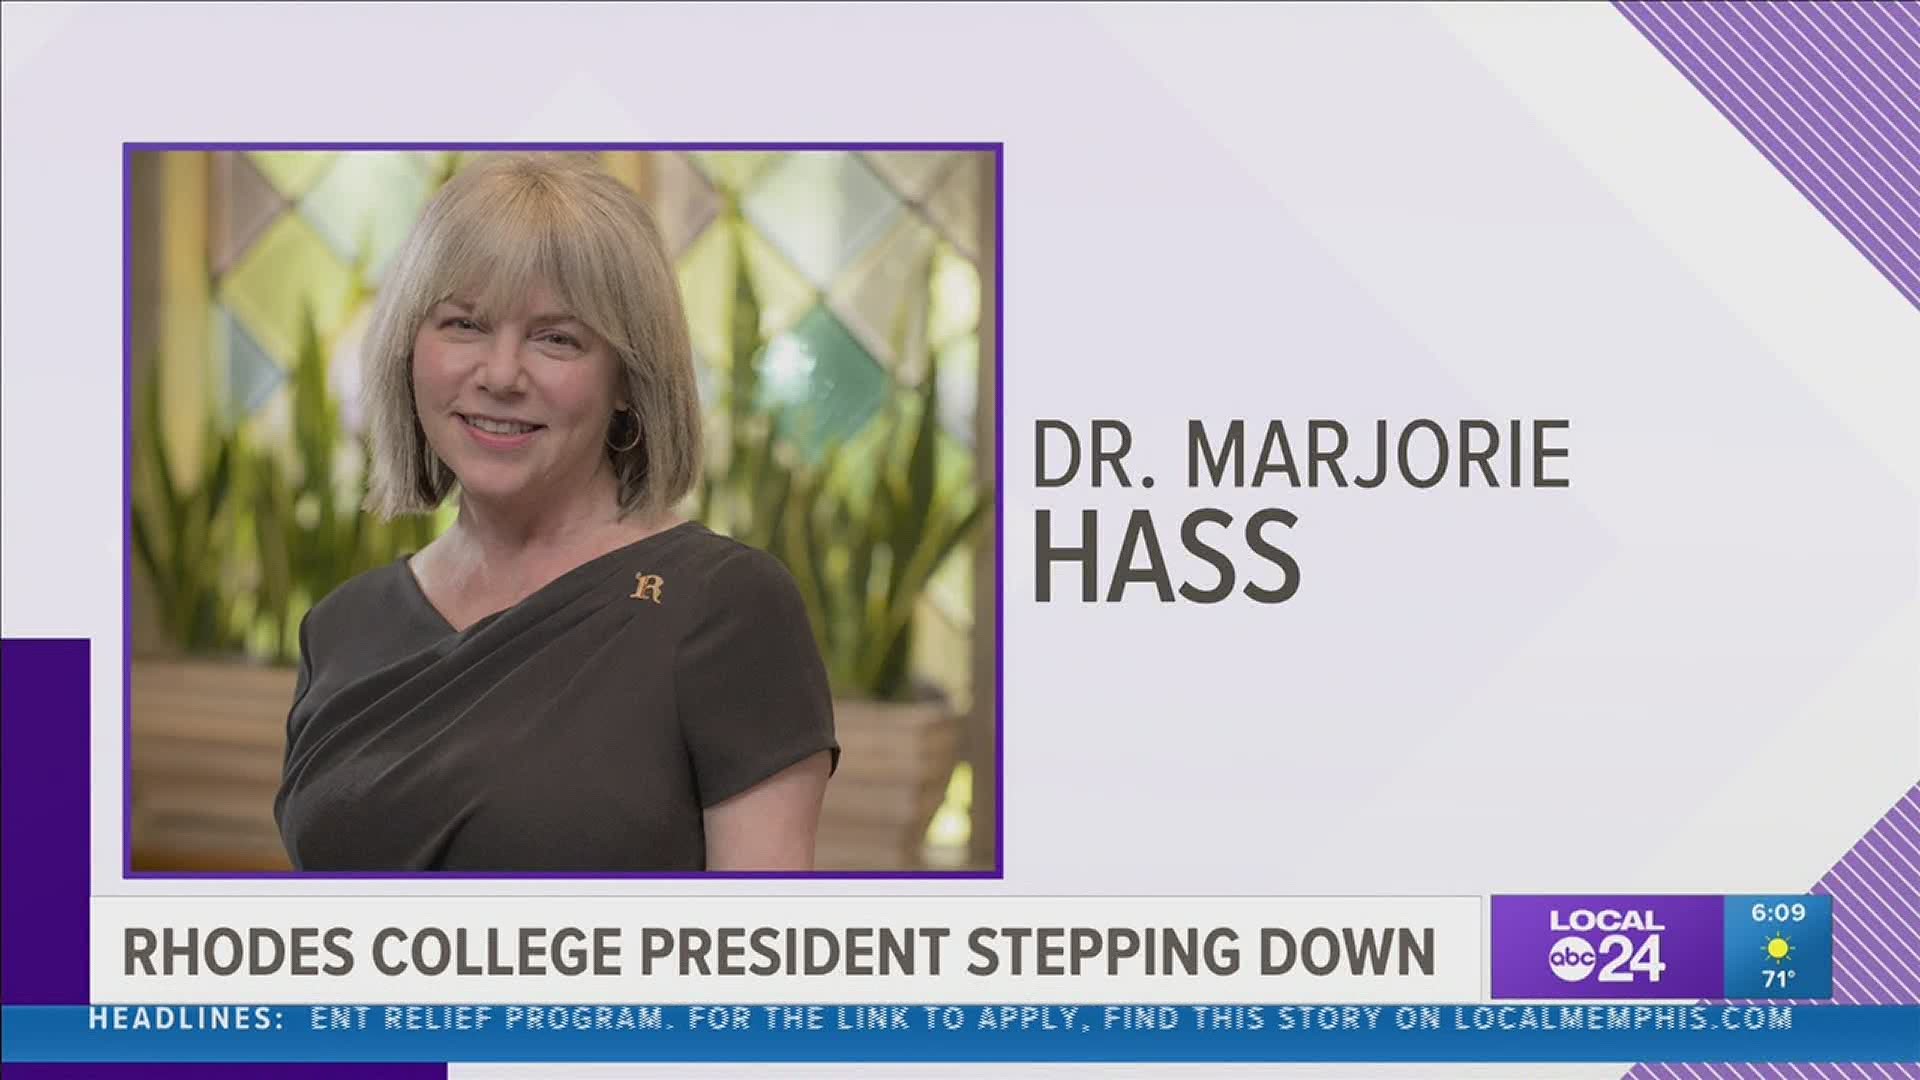 Rhodes College President Marjorie Hass will depart the college this summer to become president of the Council of Independent Colleges.